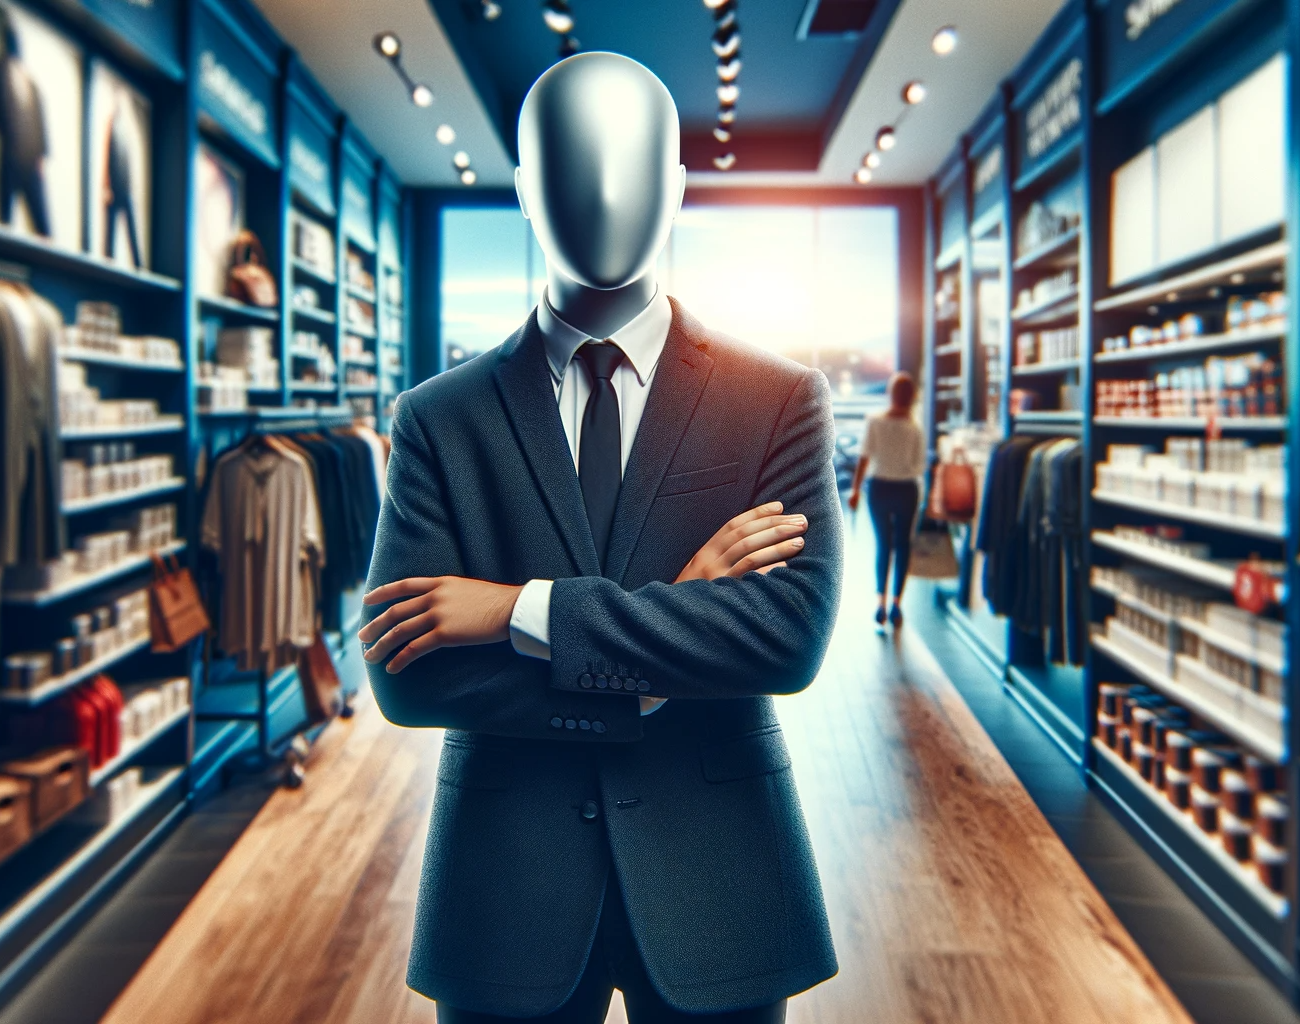 A private investigator carrying out a mystery shop investigation in a clothing shop. His face is covered, to depict the covert aspect of operations. Private Investigator